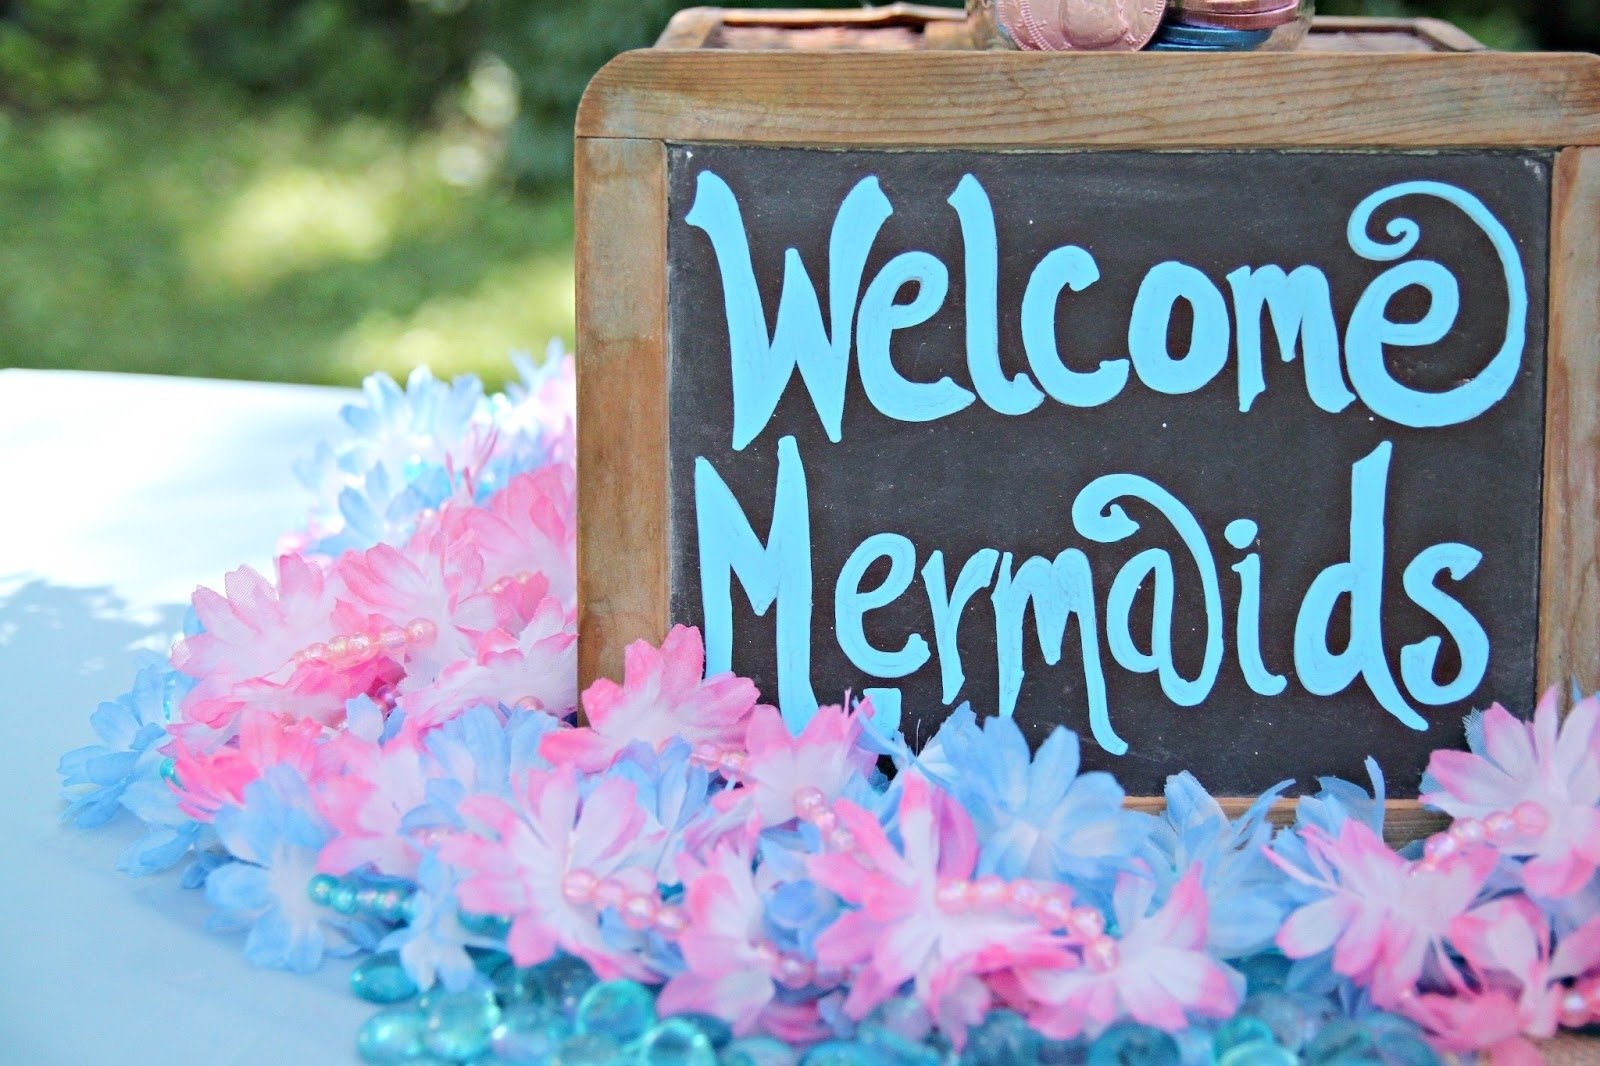 10 Most Recommended The Little Mermaid Party Ideas 14 awesome little mermaid birthday party ideas birthday inspire 3 2022